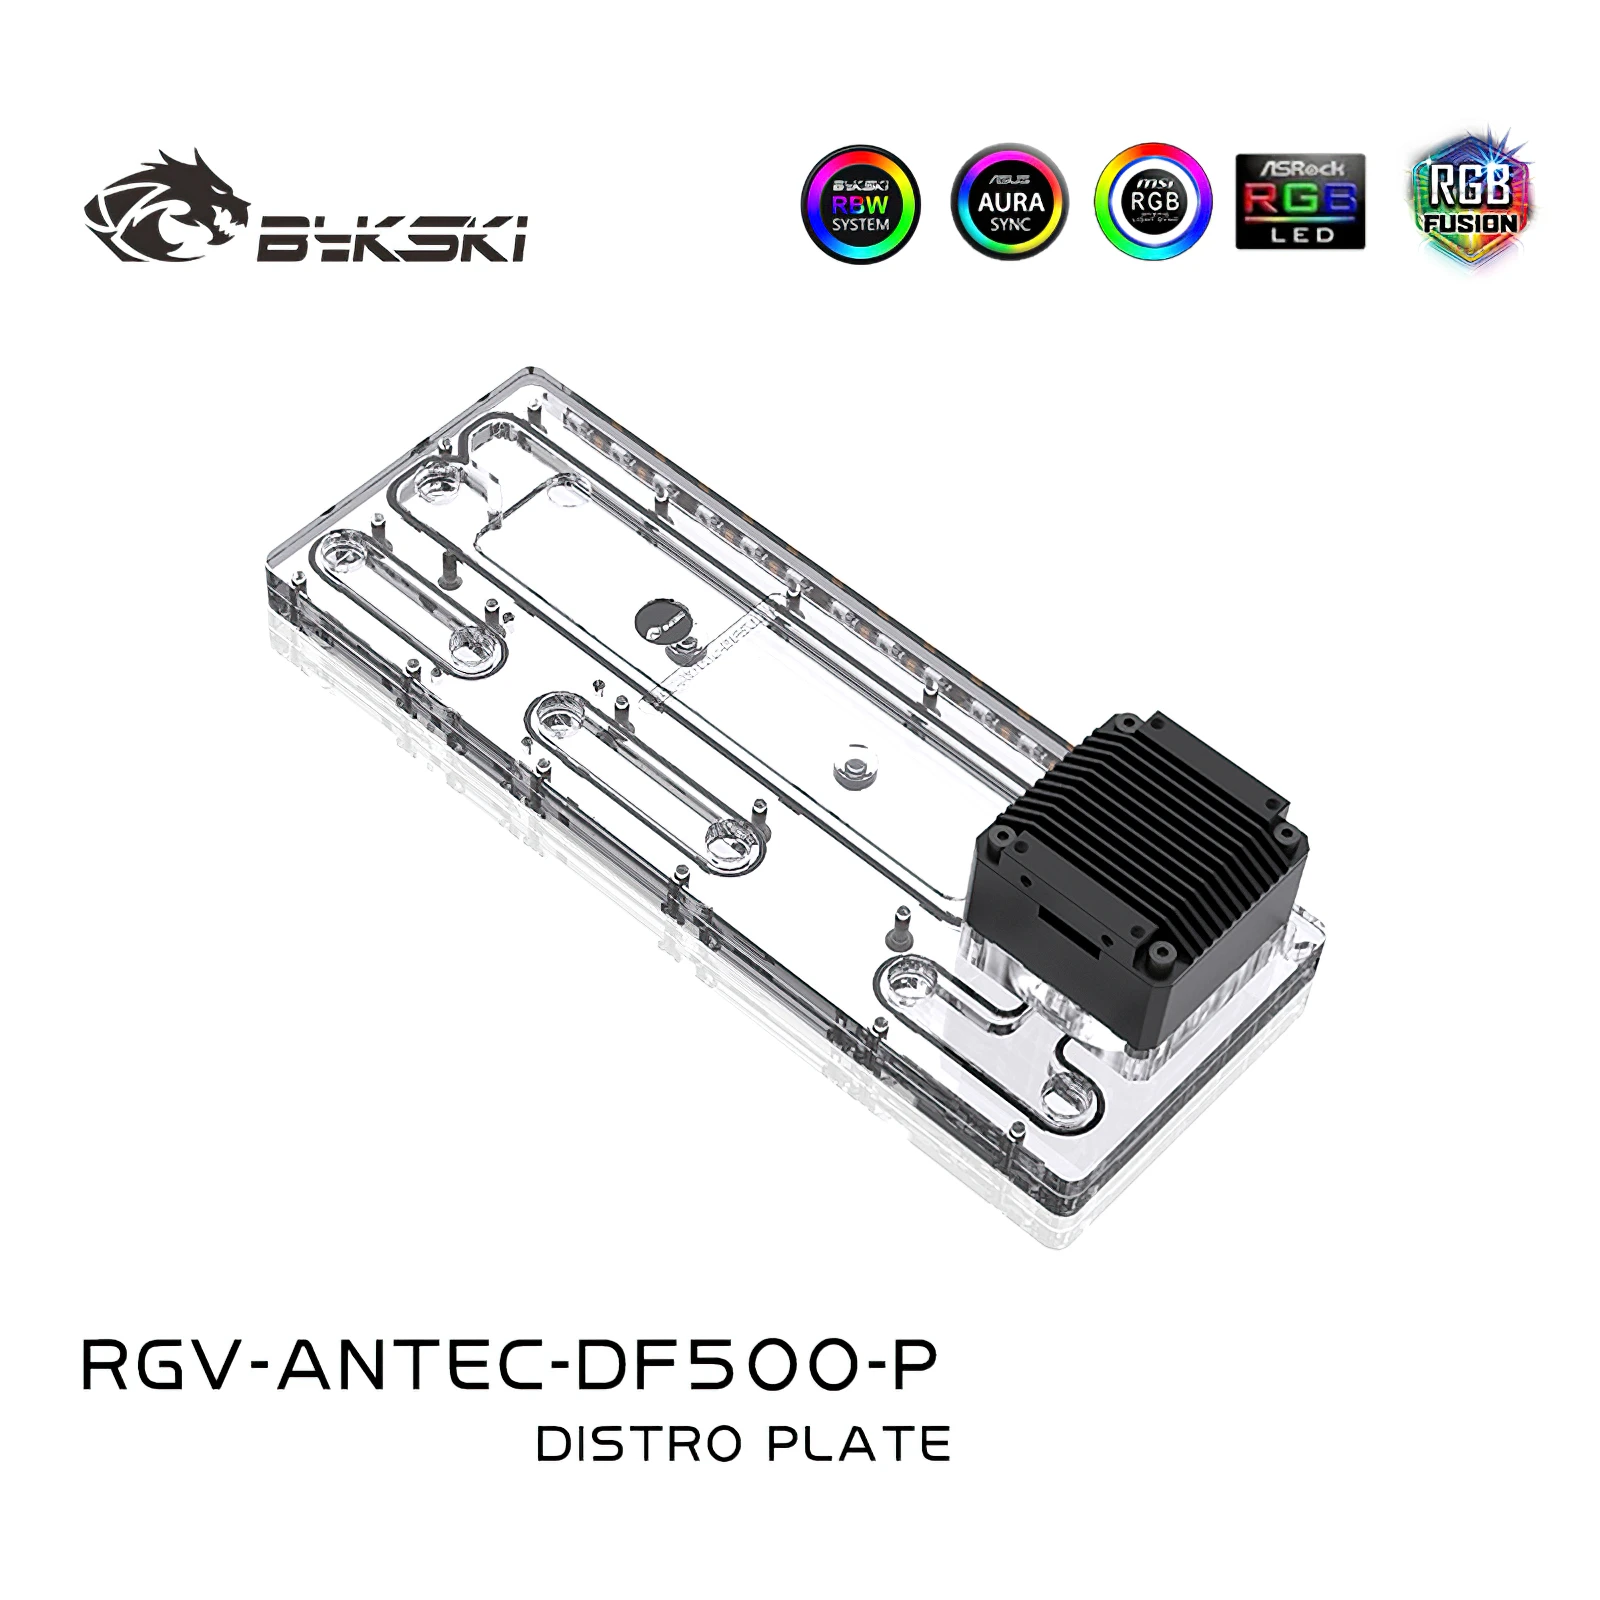 

Bykski RGB Water Cooling Distro Plate Reservoir for ANTEC DF500 Chassis Case RGV-Antec-DF500-P